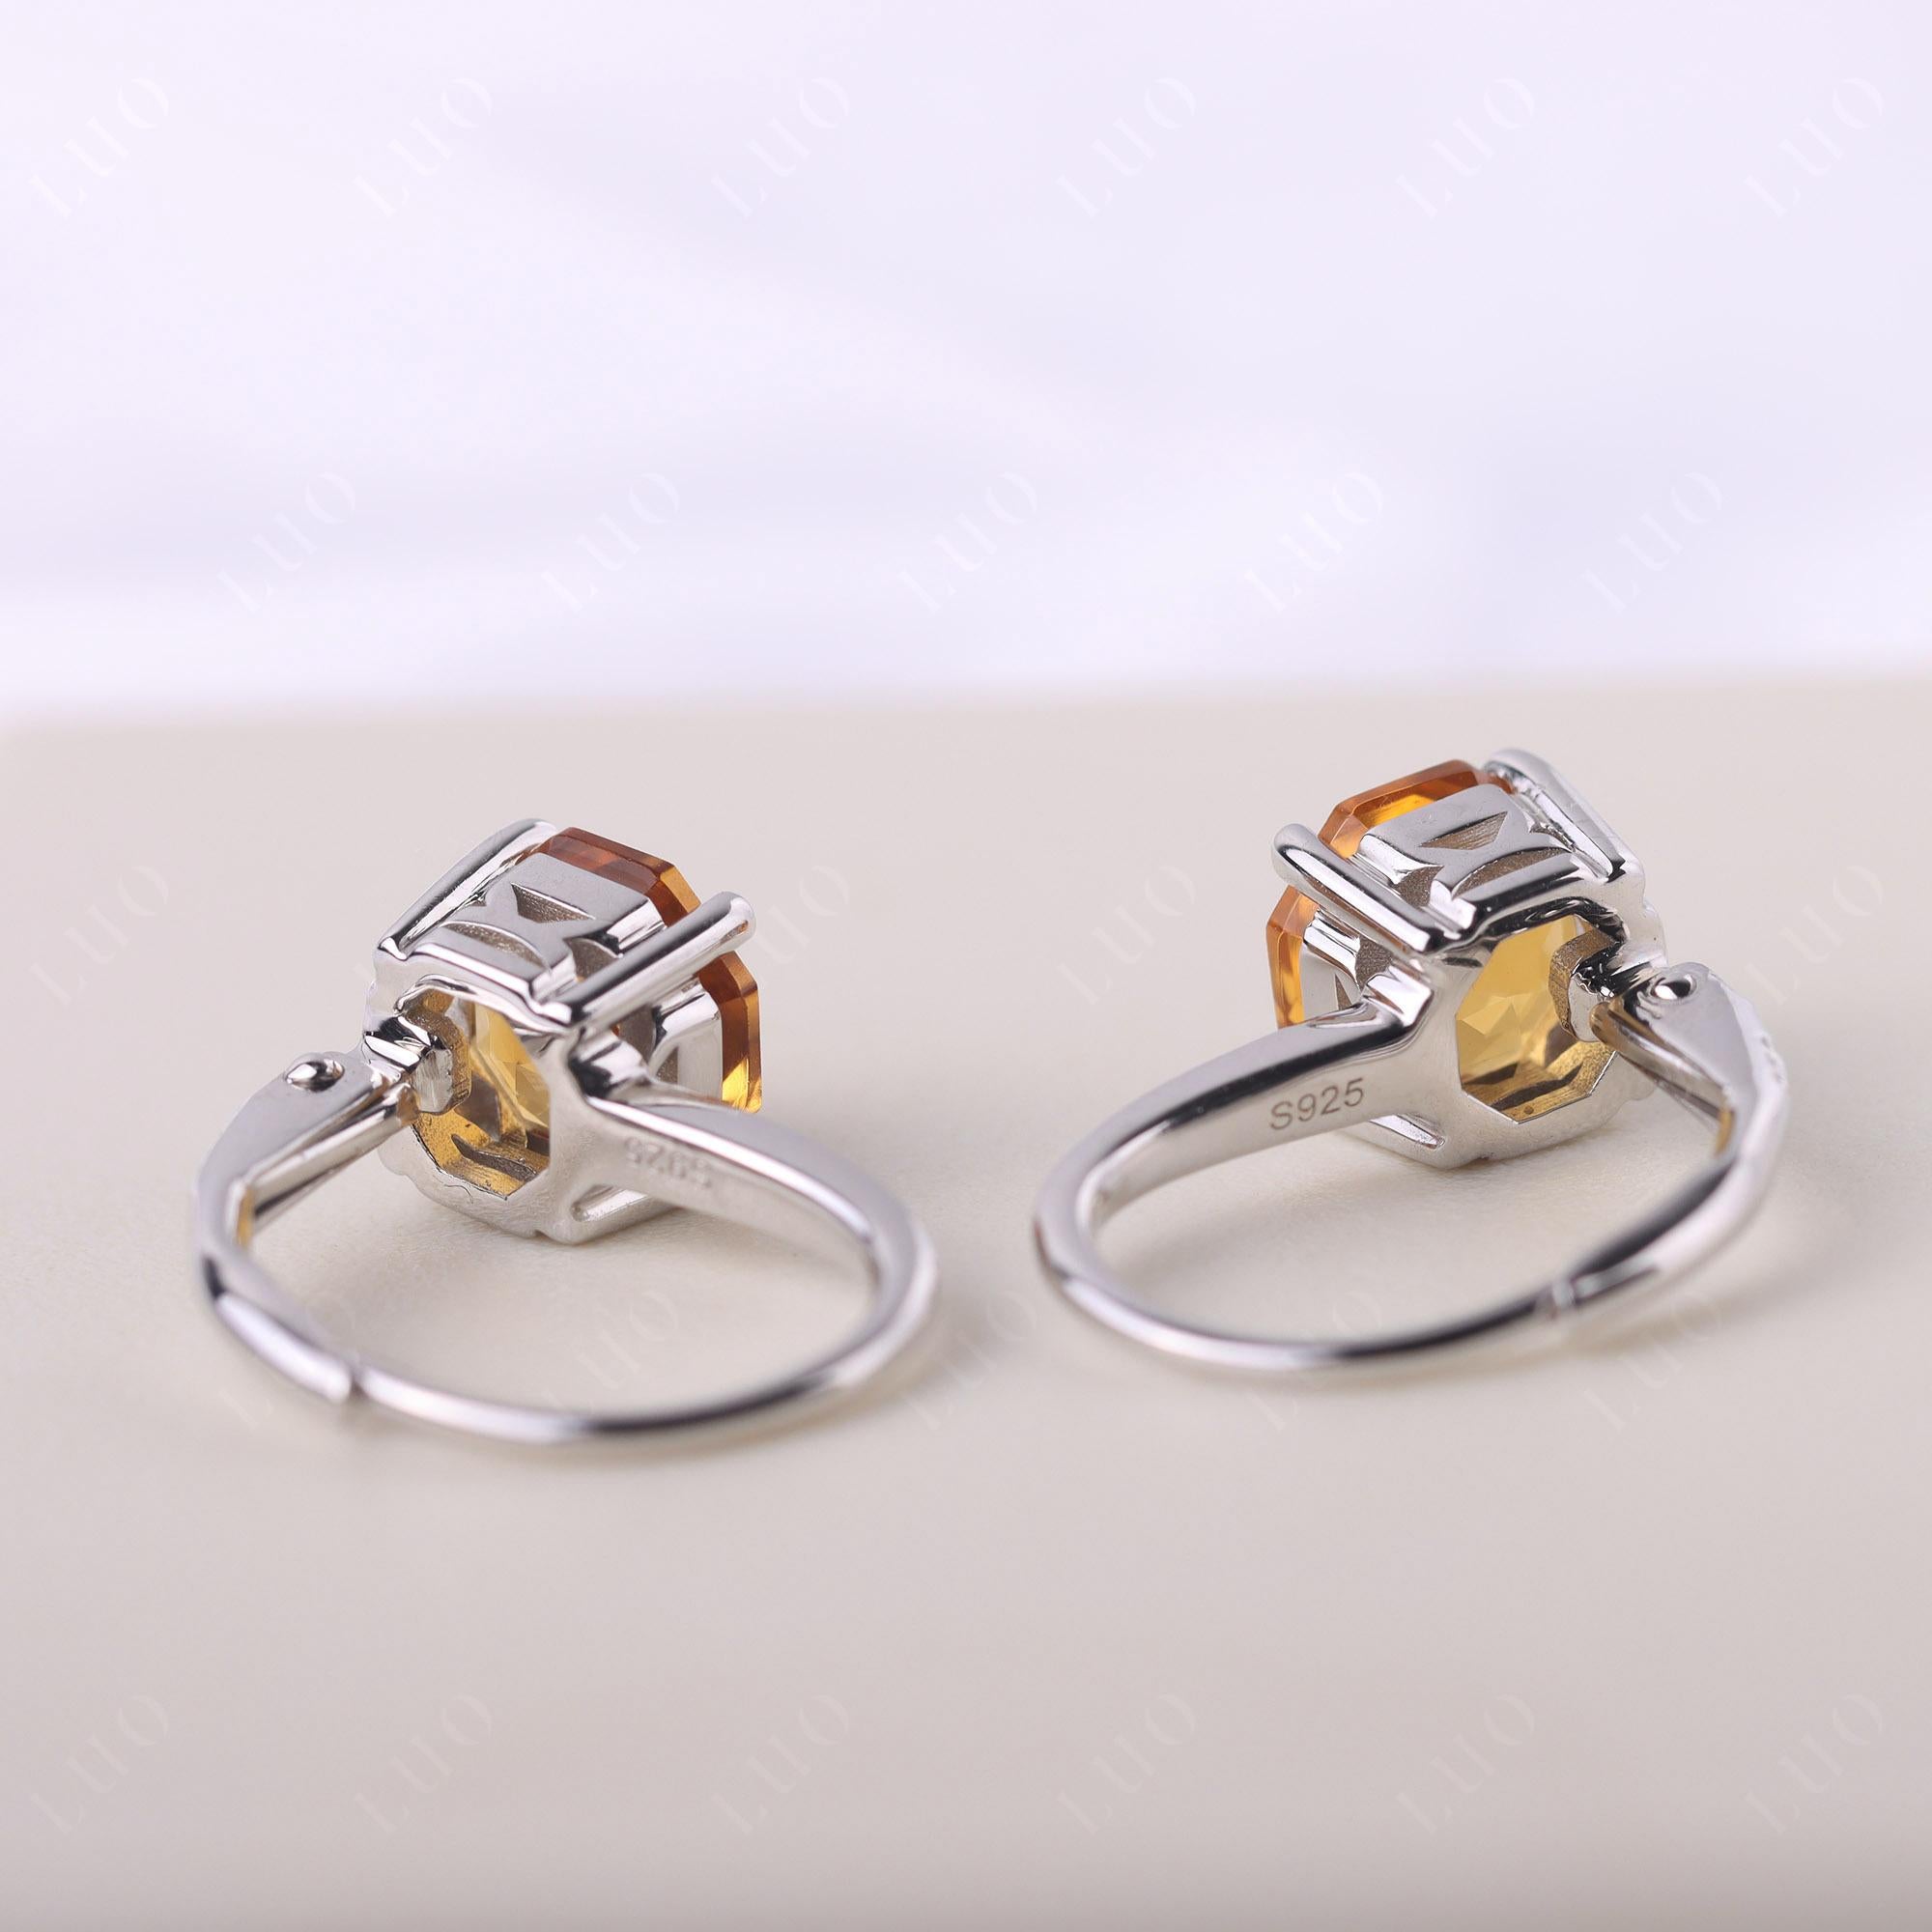 Octagon Cut Citrine Leverback Earrings - LUO Jewelry